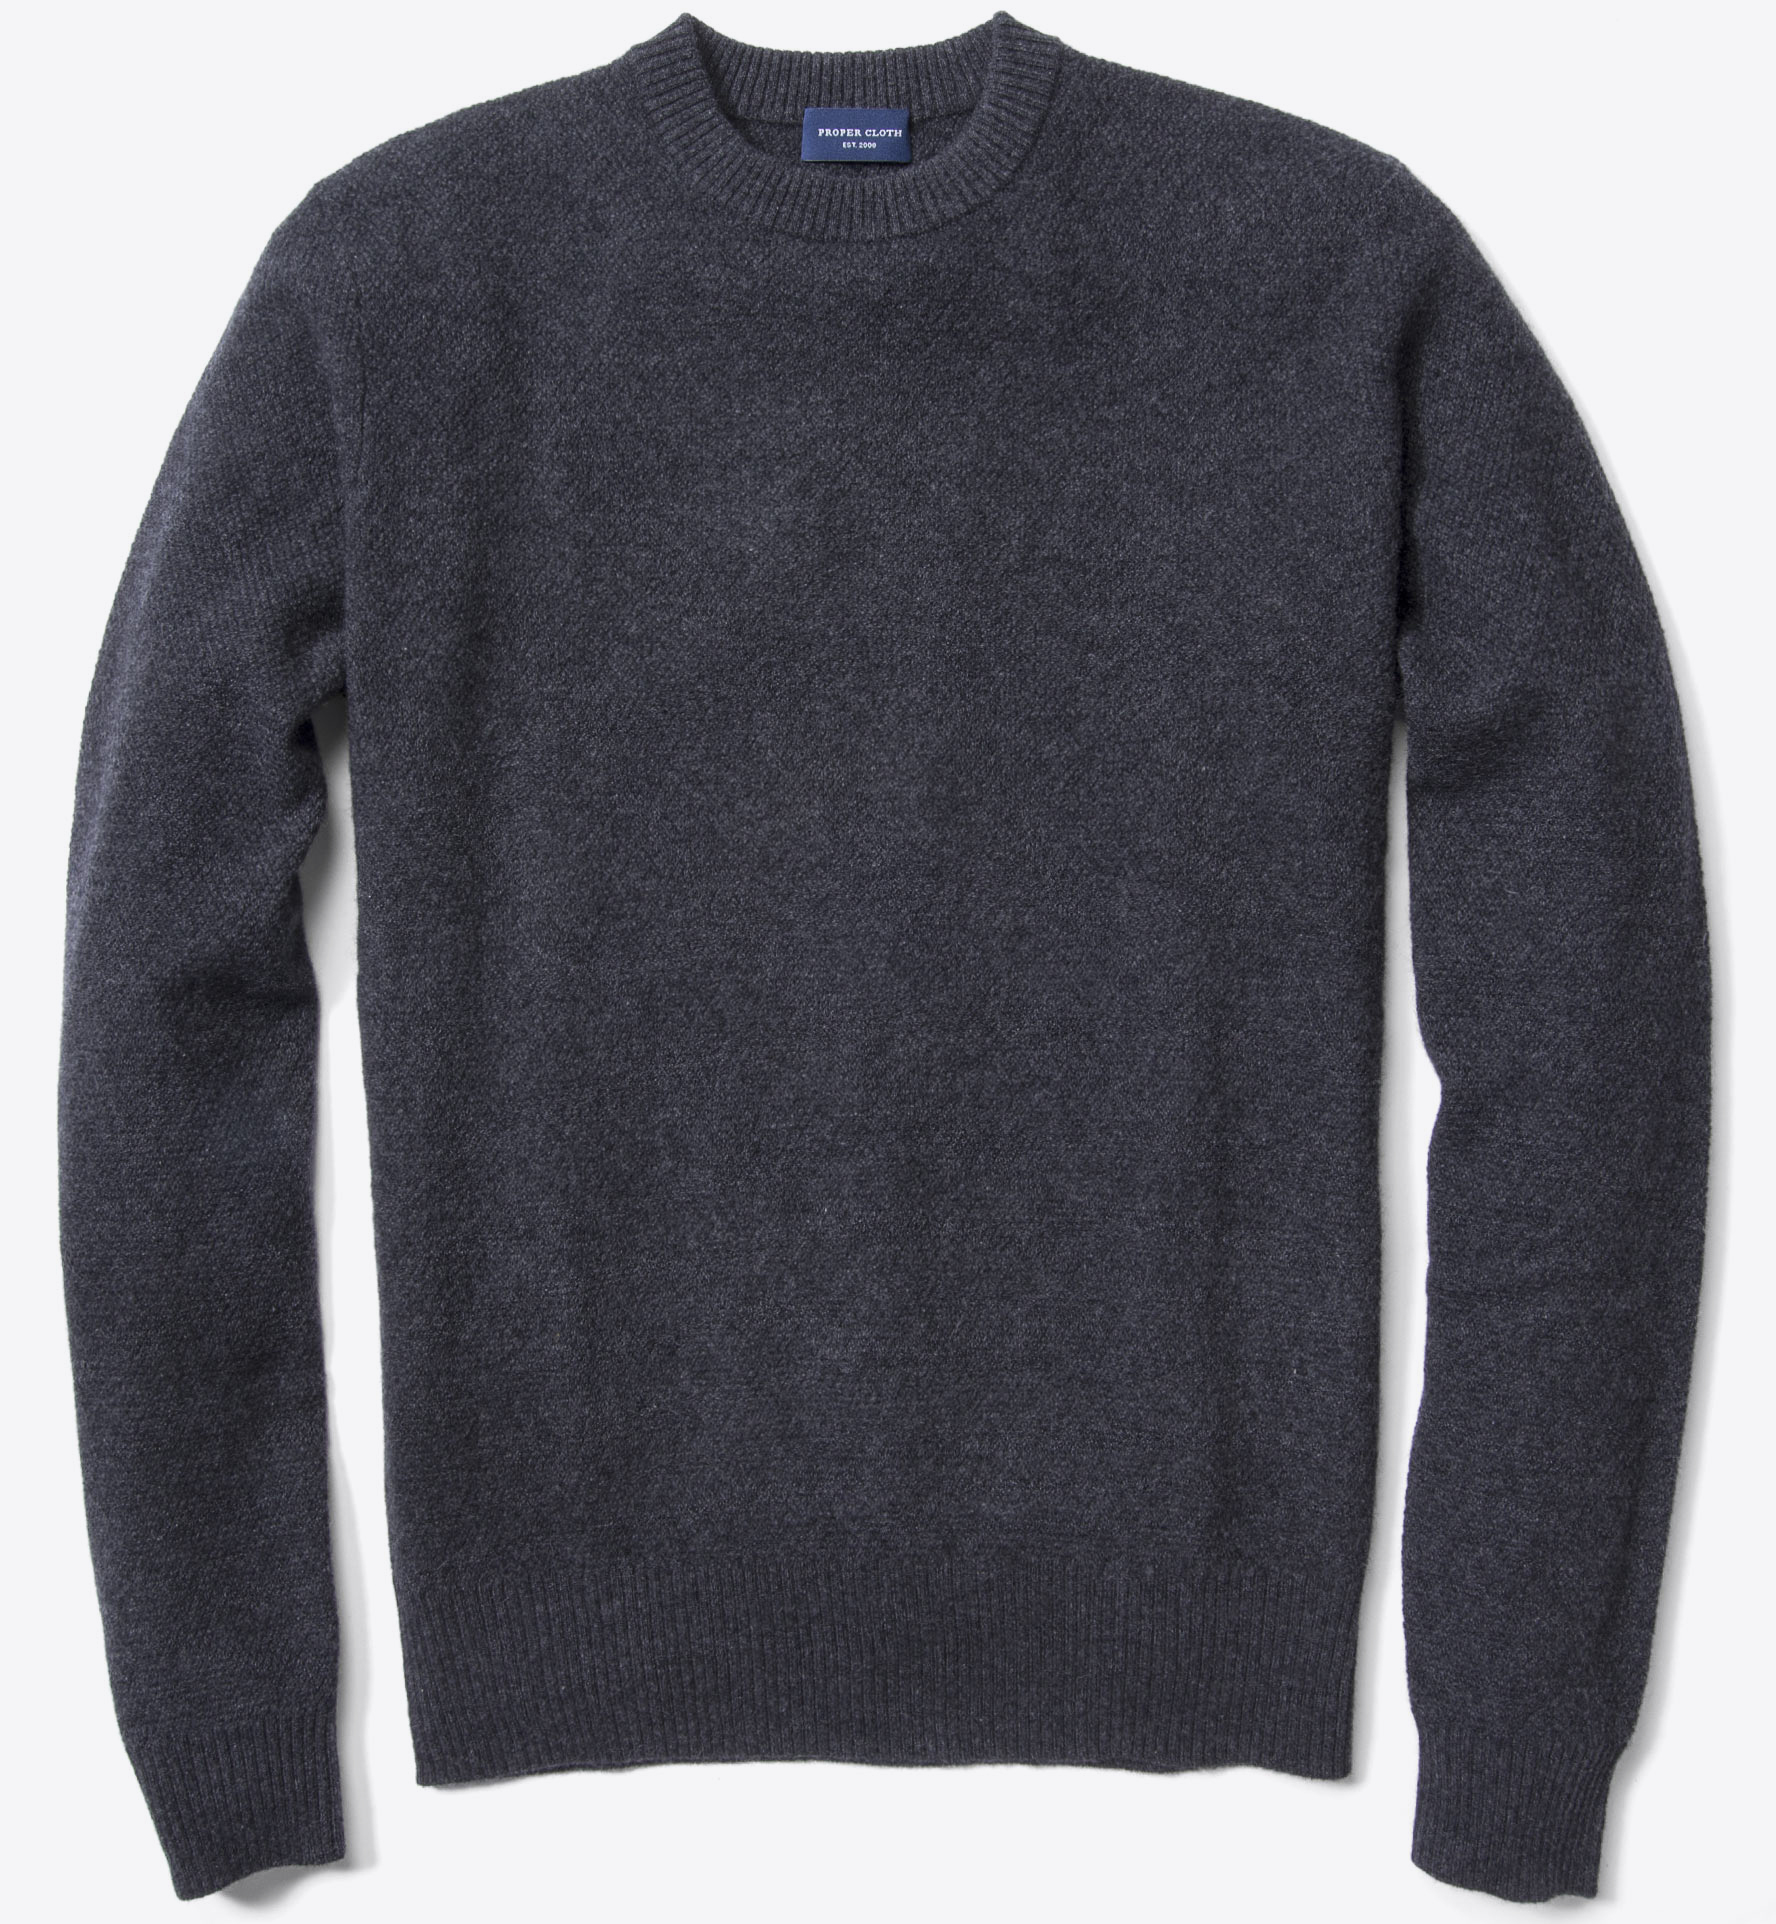 Charcoal Cobble Stitch Cashmere Sweater by Proper Cloth